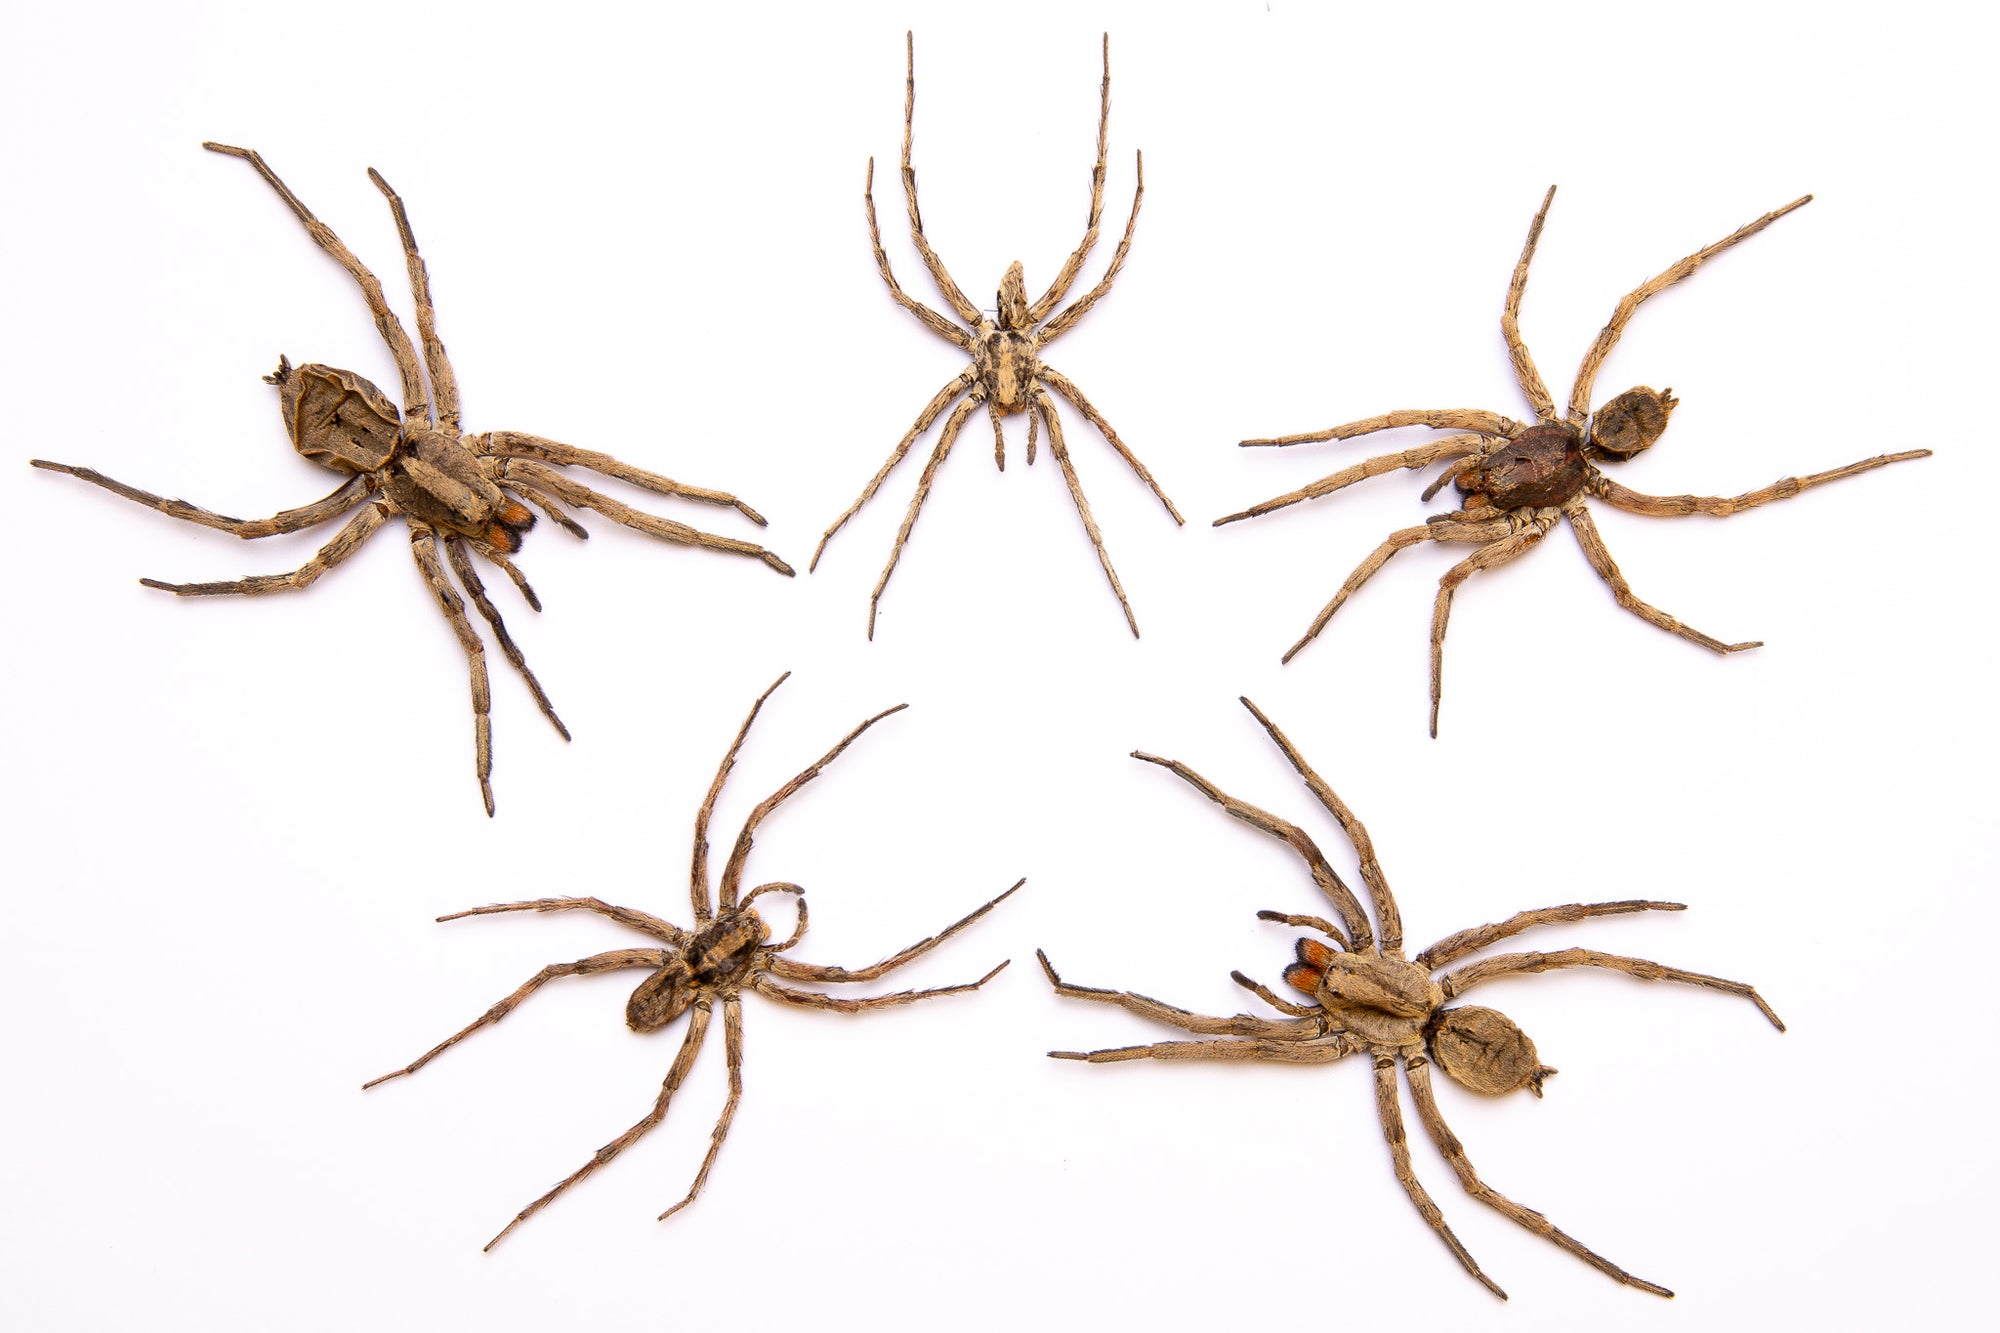 FIVE (5) Thai Wolf Spiders (Lycosidae sp) 2.5 INCH A1 Specimens